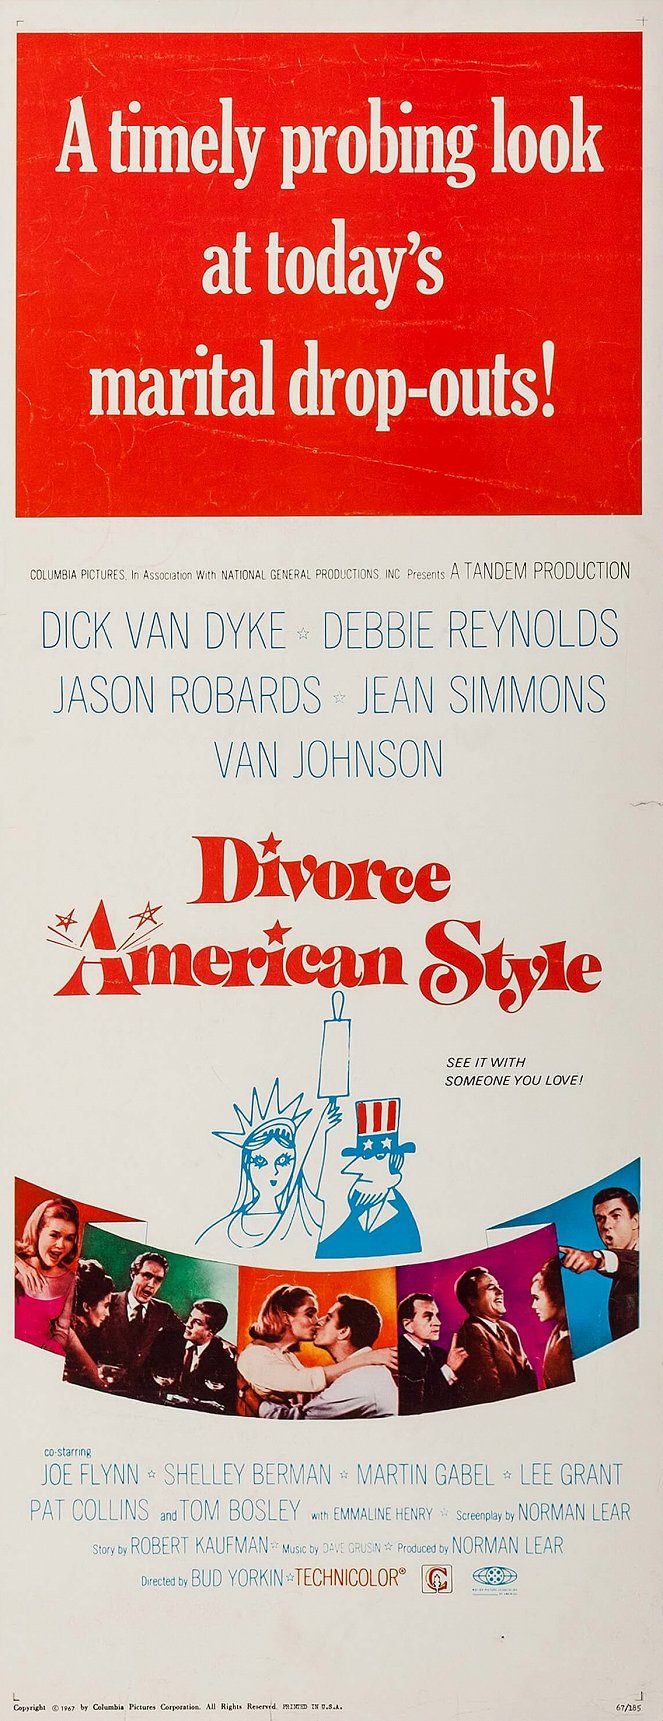 Divorce American Style - Posters